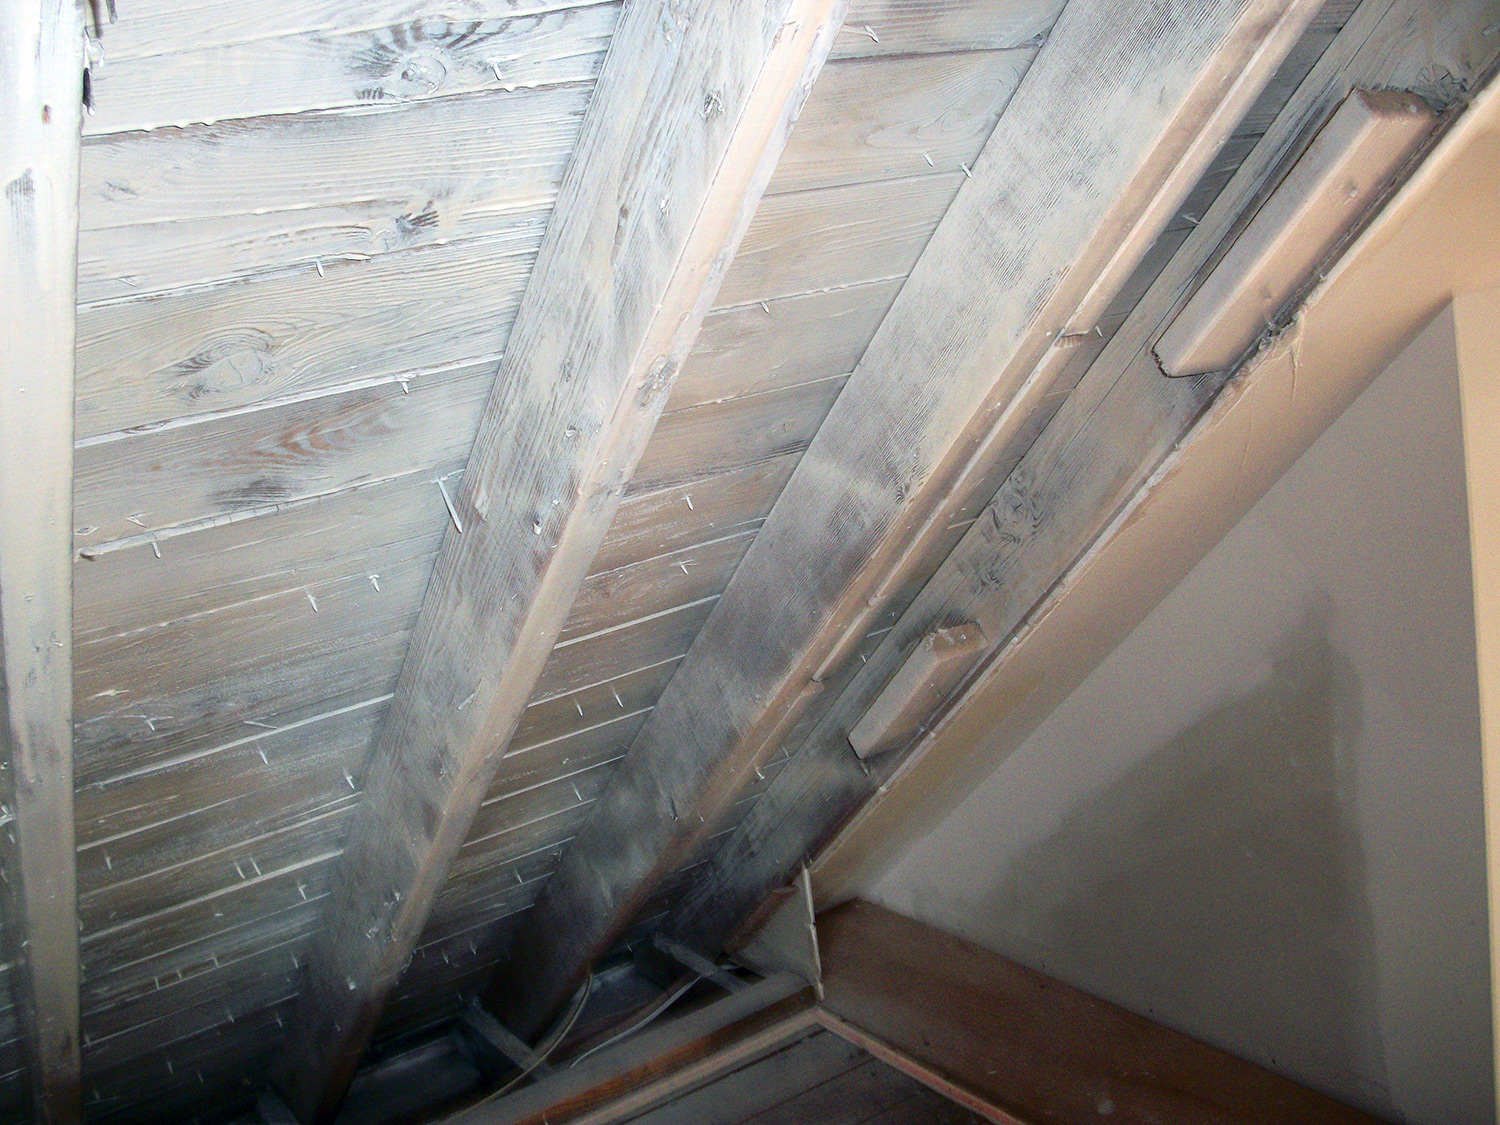 Water damage removed from roofing boards in the attic with anti-mold coating